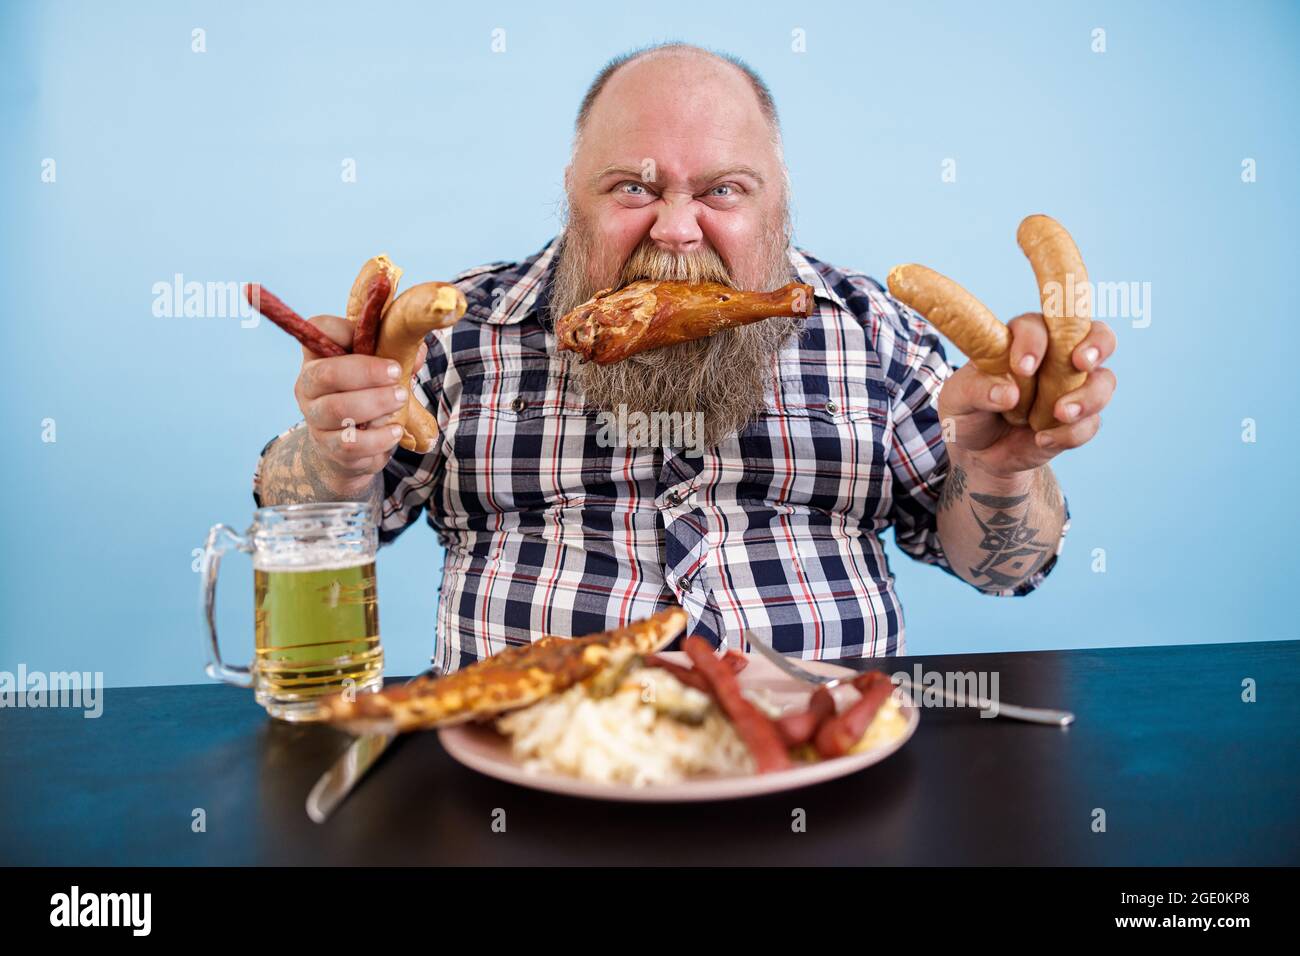 Fat man with chicken leg in mouth holds sausages at table in studio Stock Photo